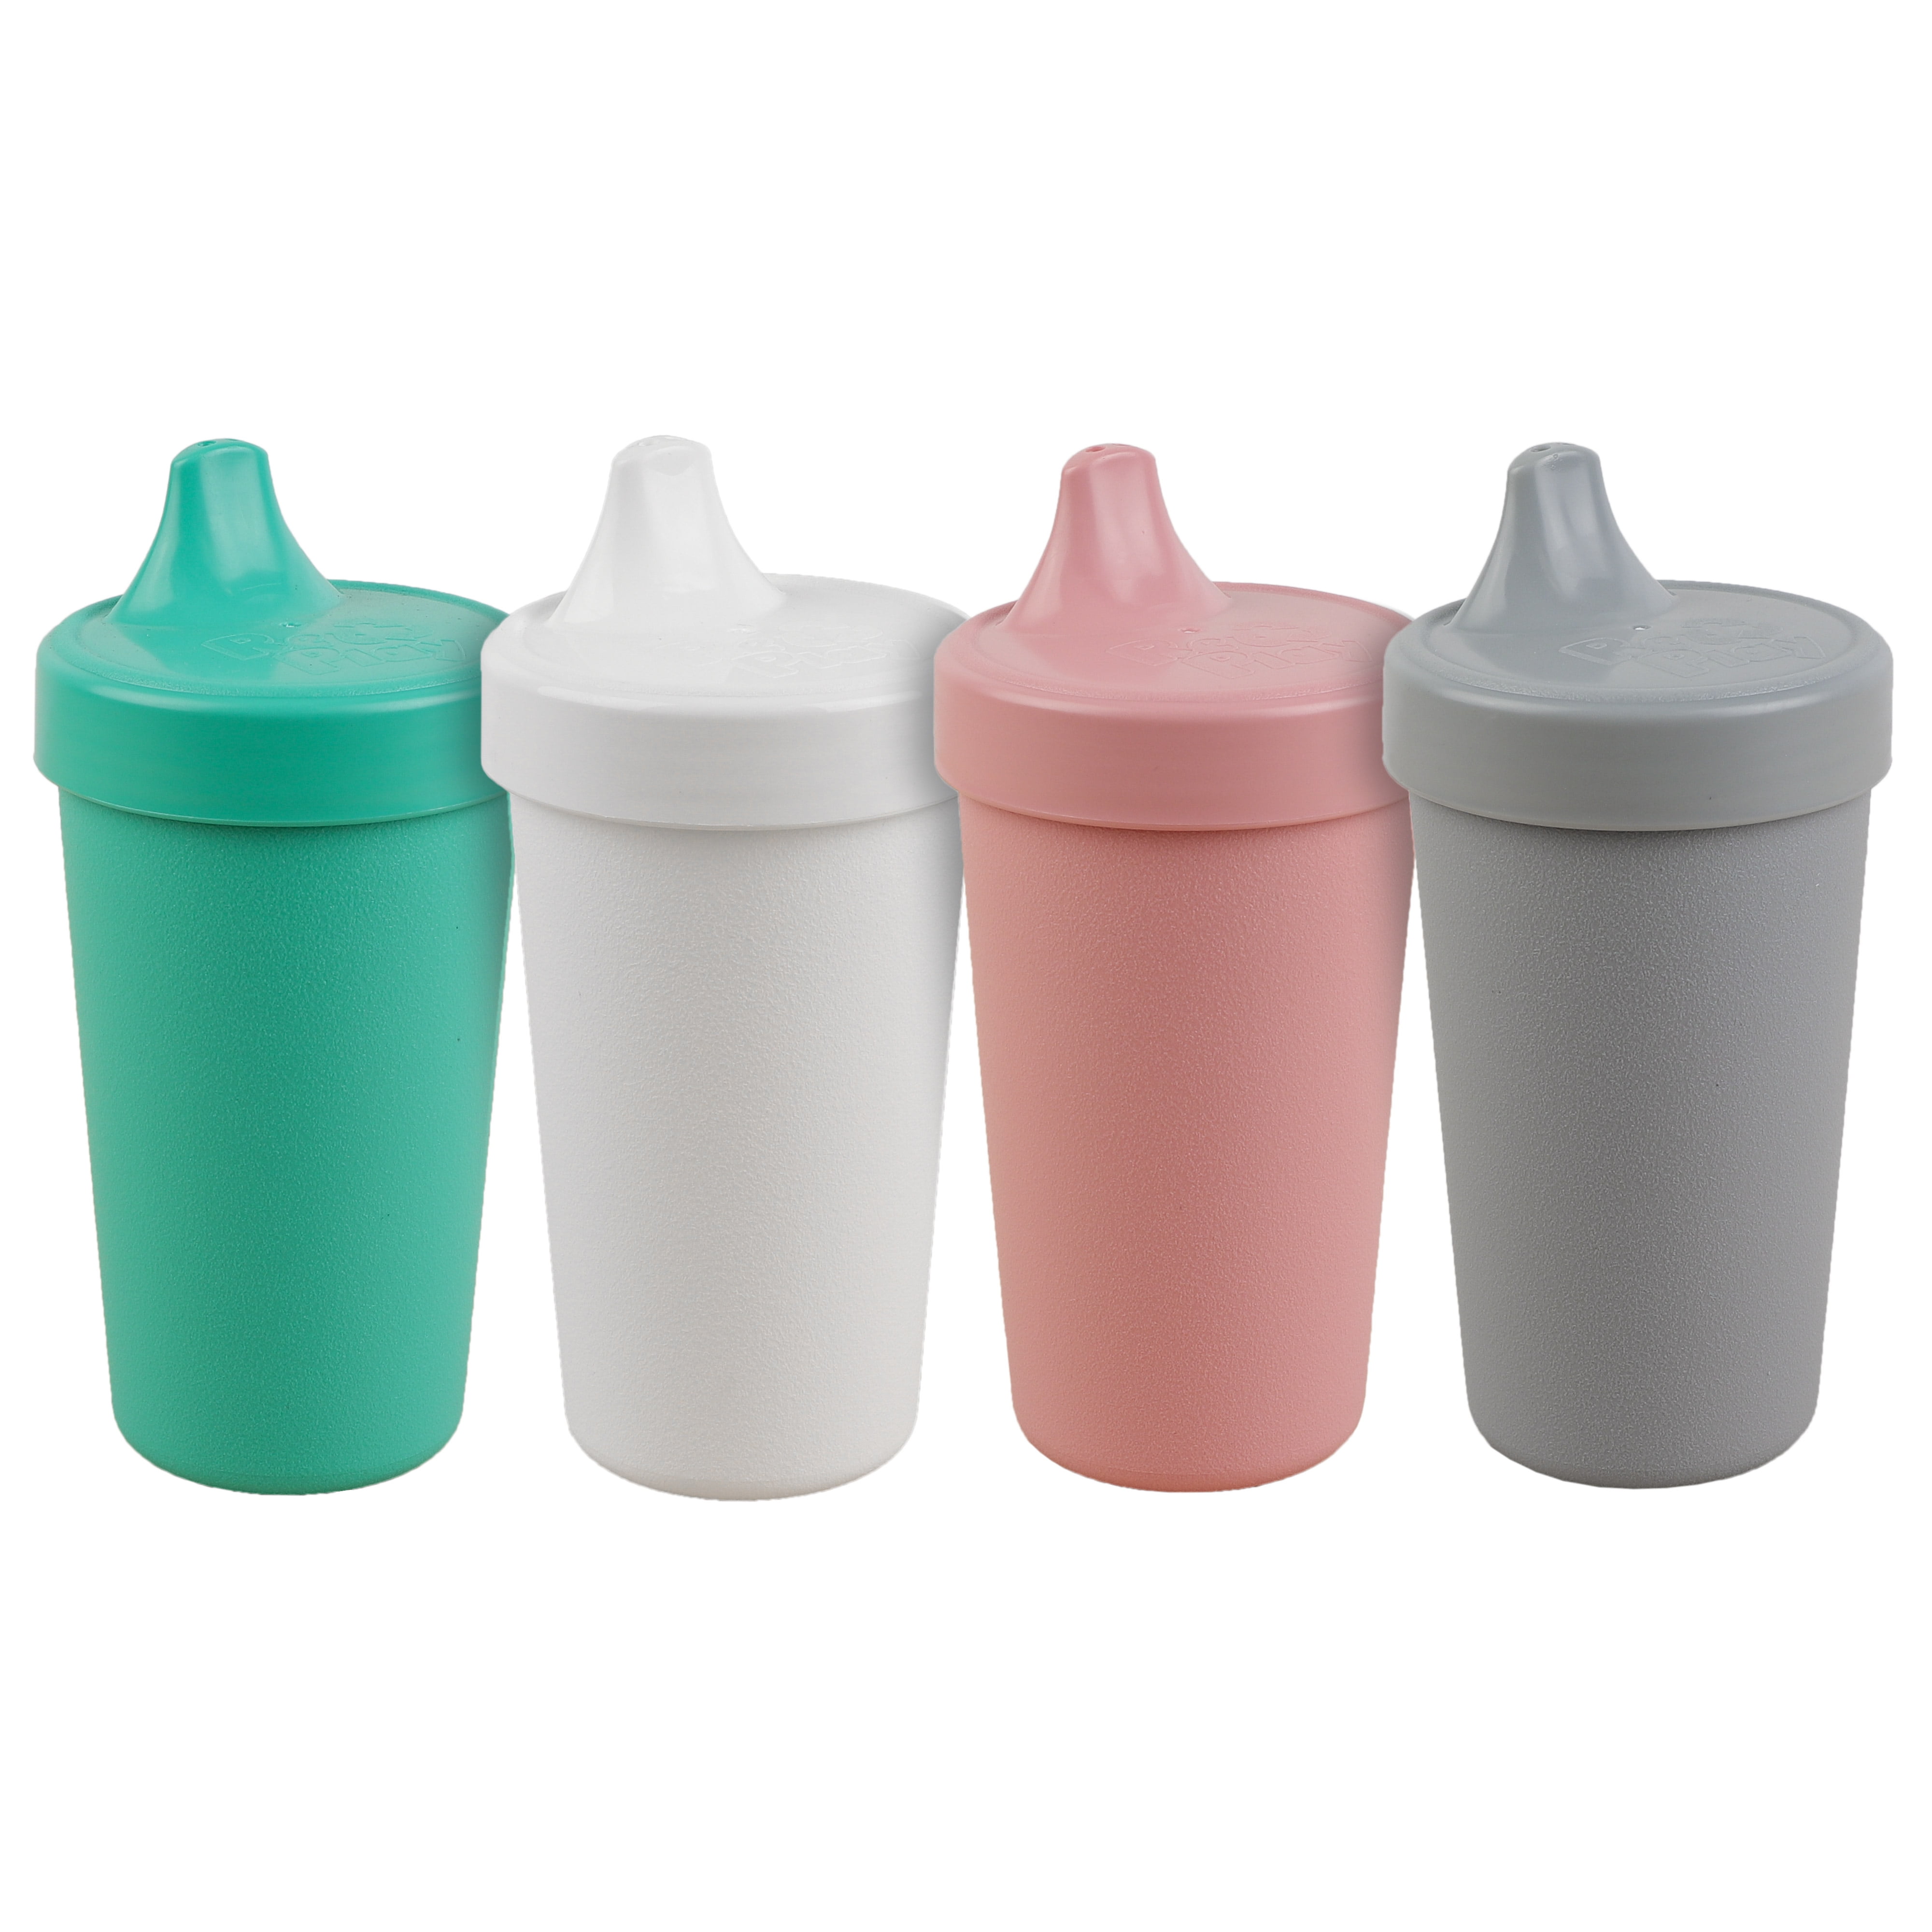 Silicone Sippy Cup Lids And Straw Lids 5 Pack Elephant Sippy Cup Lid Spillproof And Leakproof For Kids Children Toddler Durable Stretches To Cover Cups Straws Included